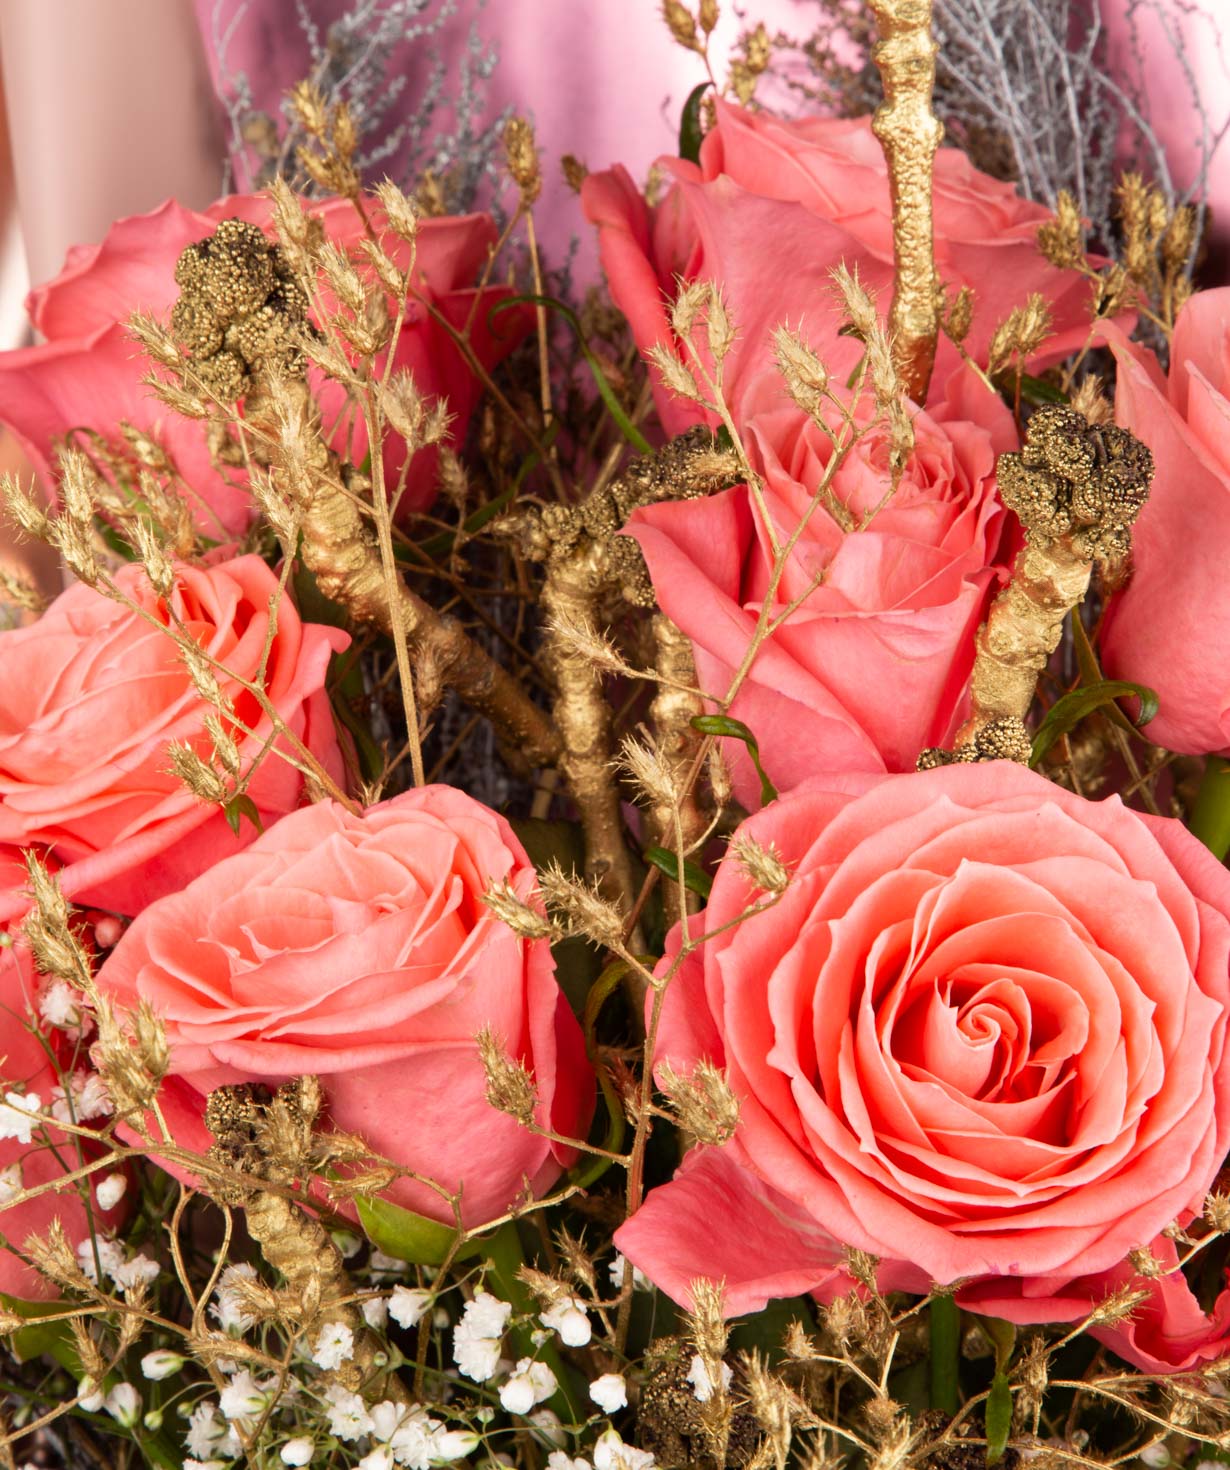 Bouquet `Glasgow` with roses and dry flowers